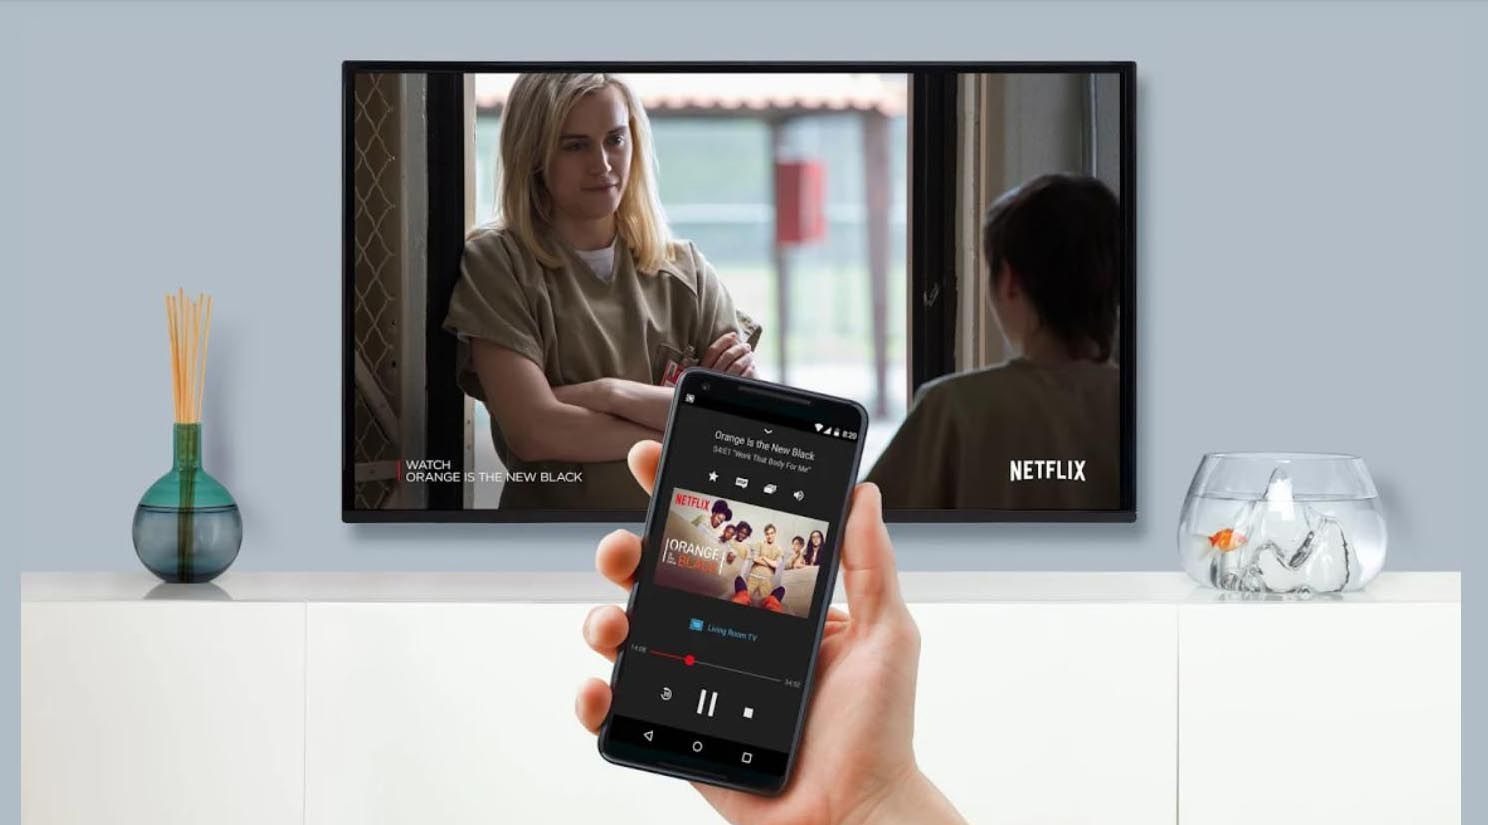 How To Watch Netflix Without Wi-Fi